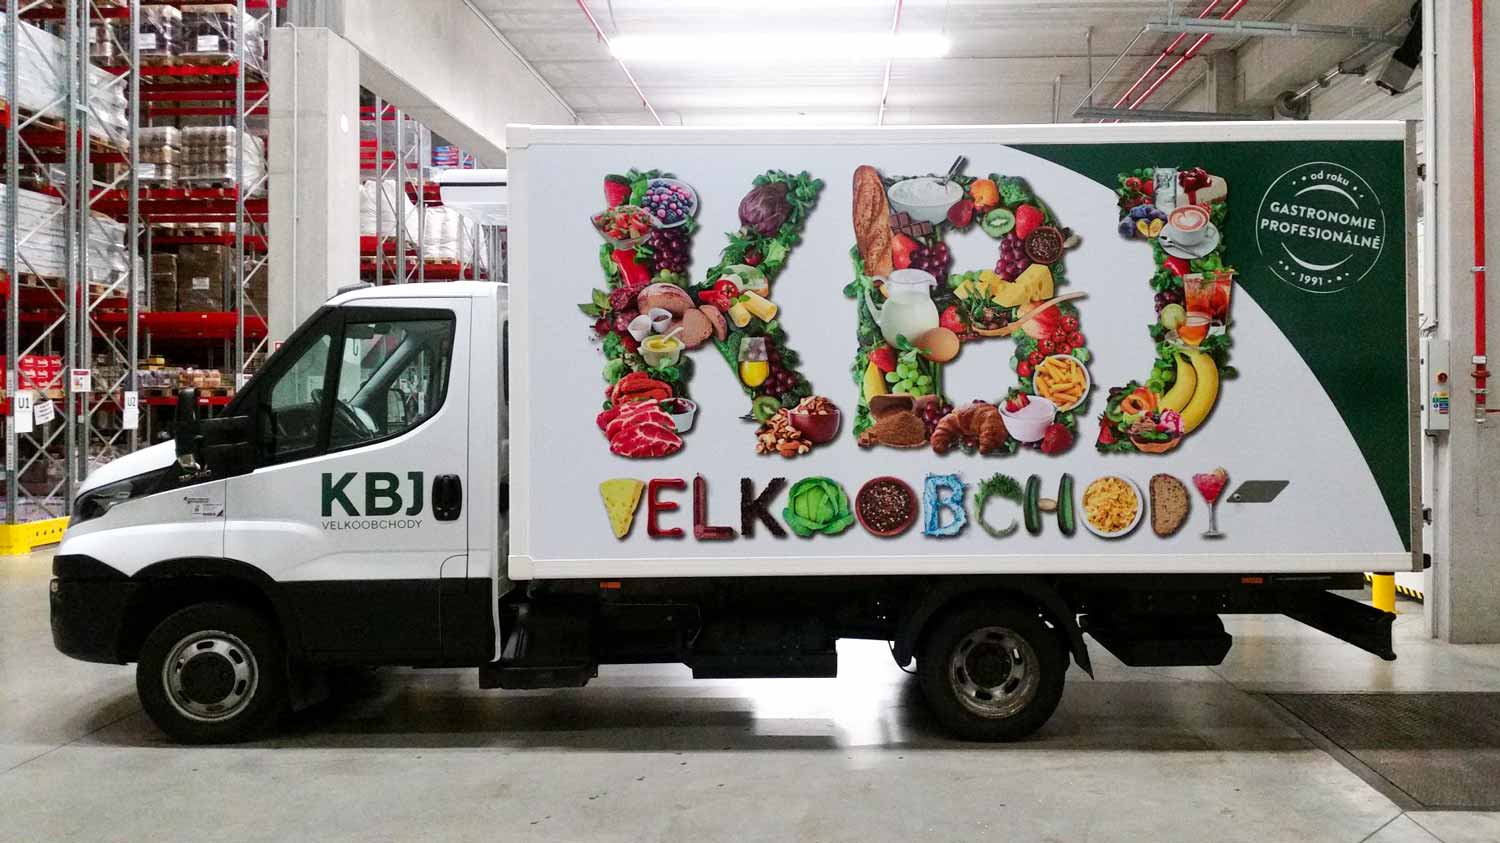 View of the KBJ's truck with a big logo made with pictures of fruit and vegetable